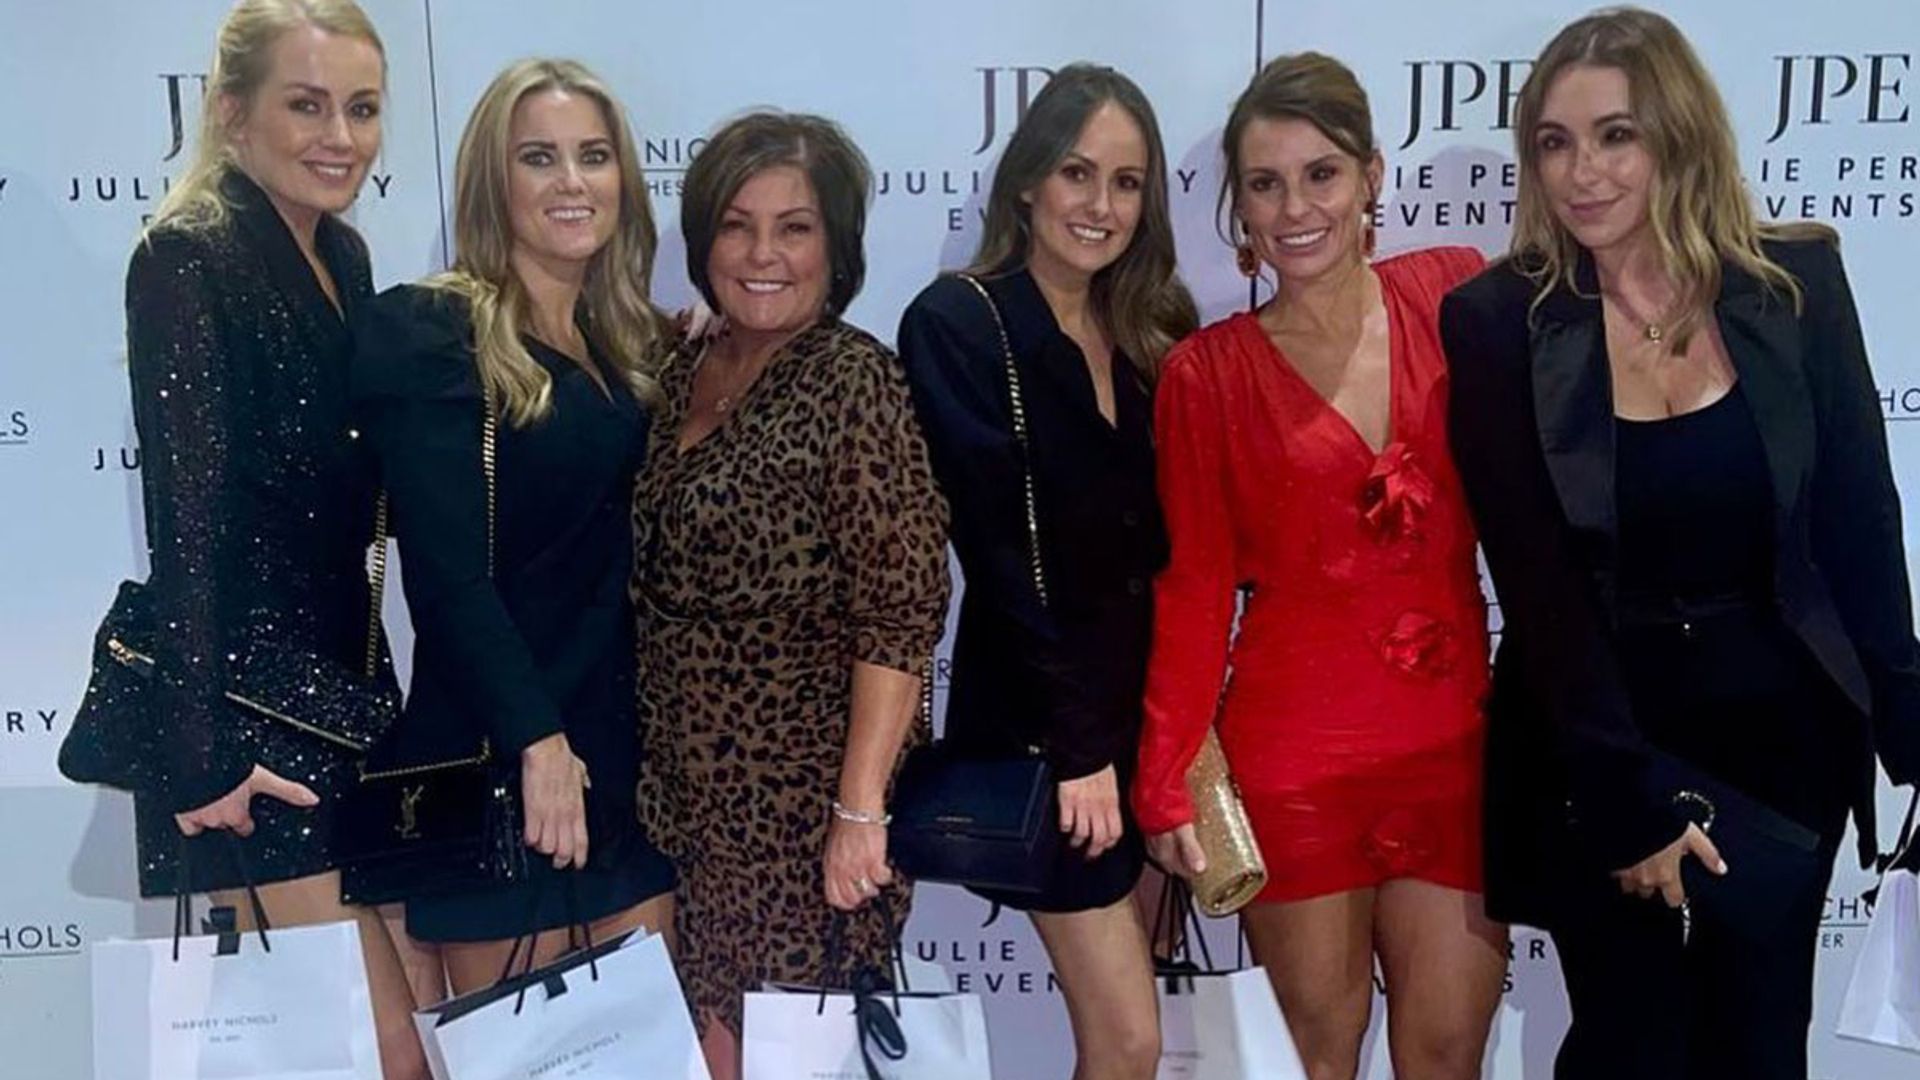 Coleen Rooney dazzles in £1,000 red hot mini dress for lunch with girlfriends